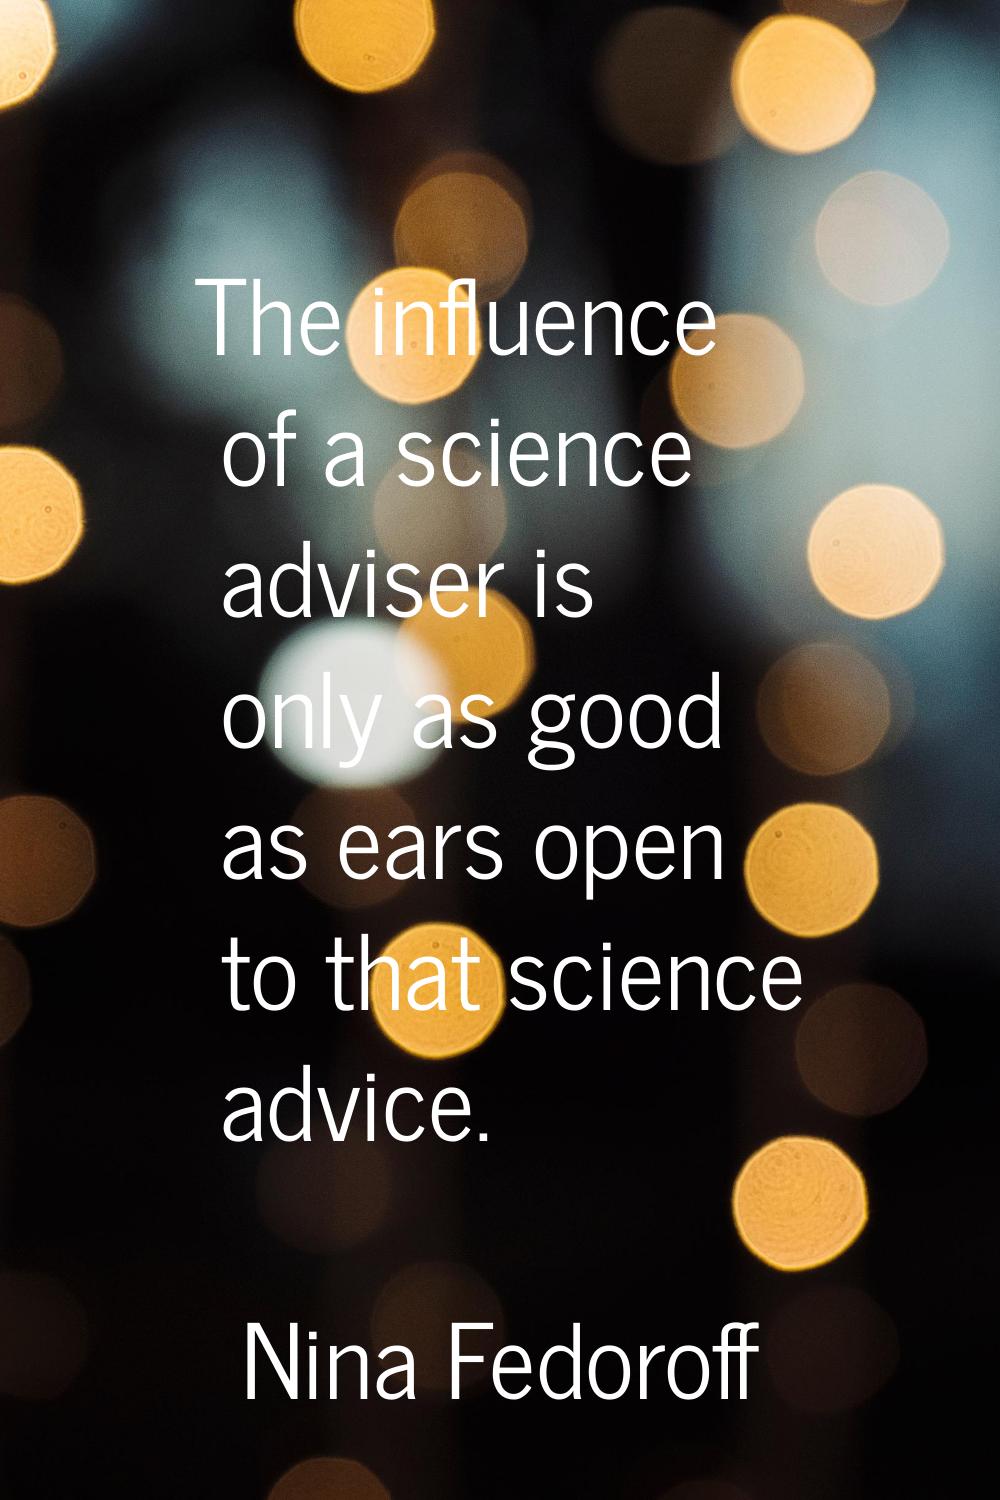 The influence of a science adviser is only as good as ears open to that science advice.